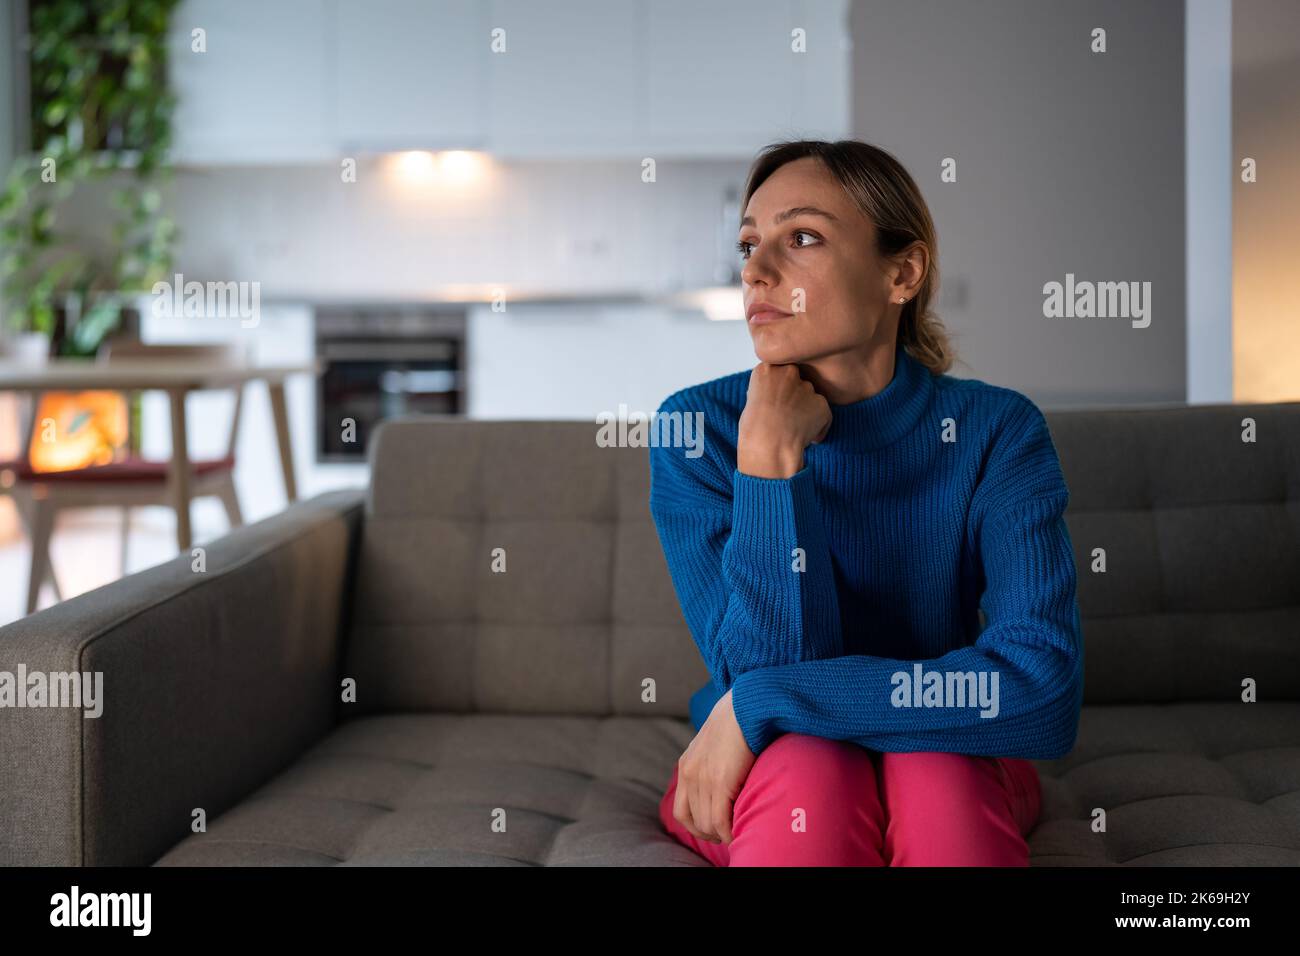 Pensive woman sits on comfortable sofa with exhausted and depressed expression in apartment Stock Photo